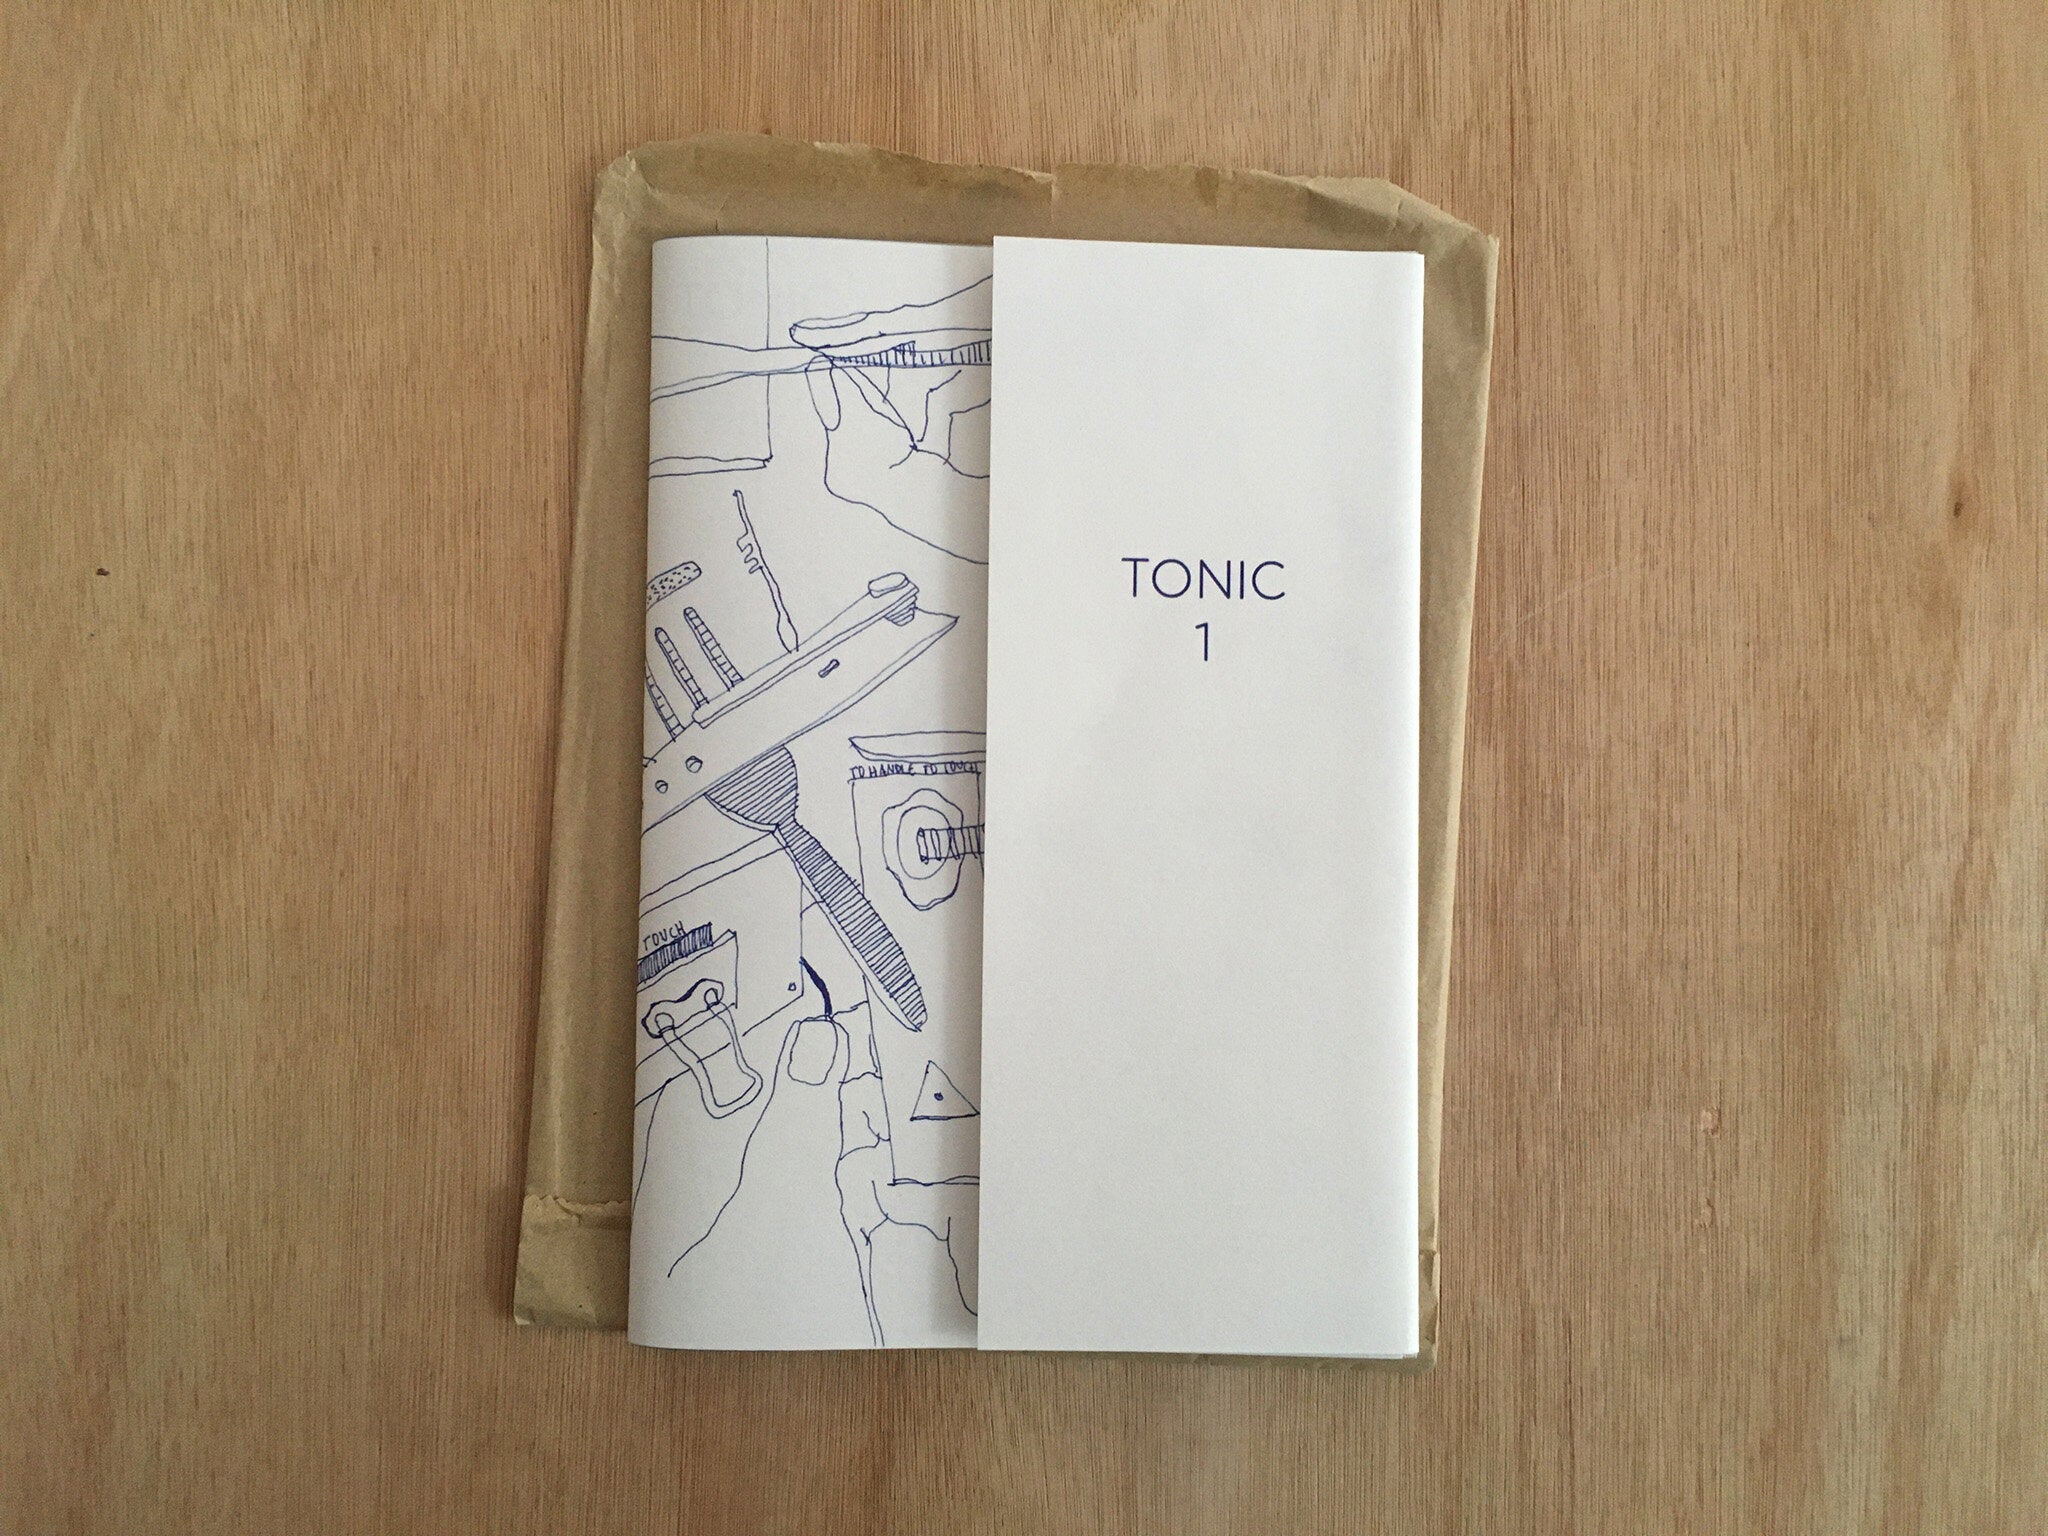 TONIC ISSUE 1 by Various Artists